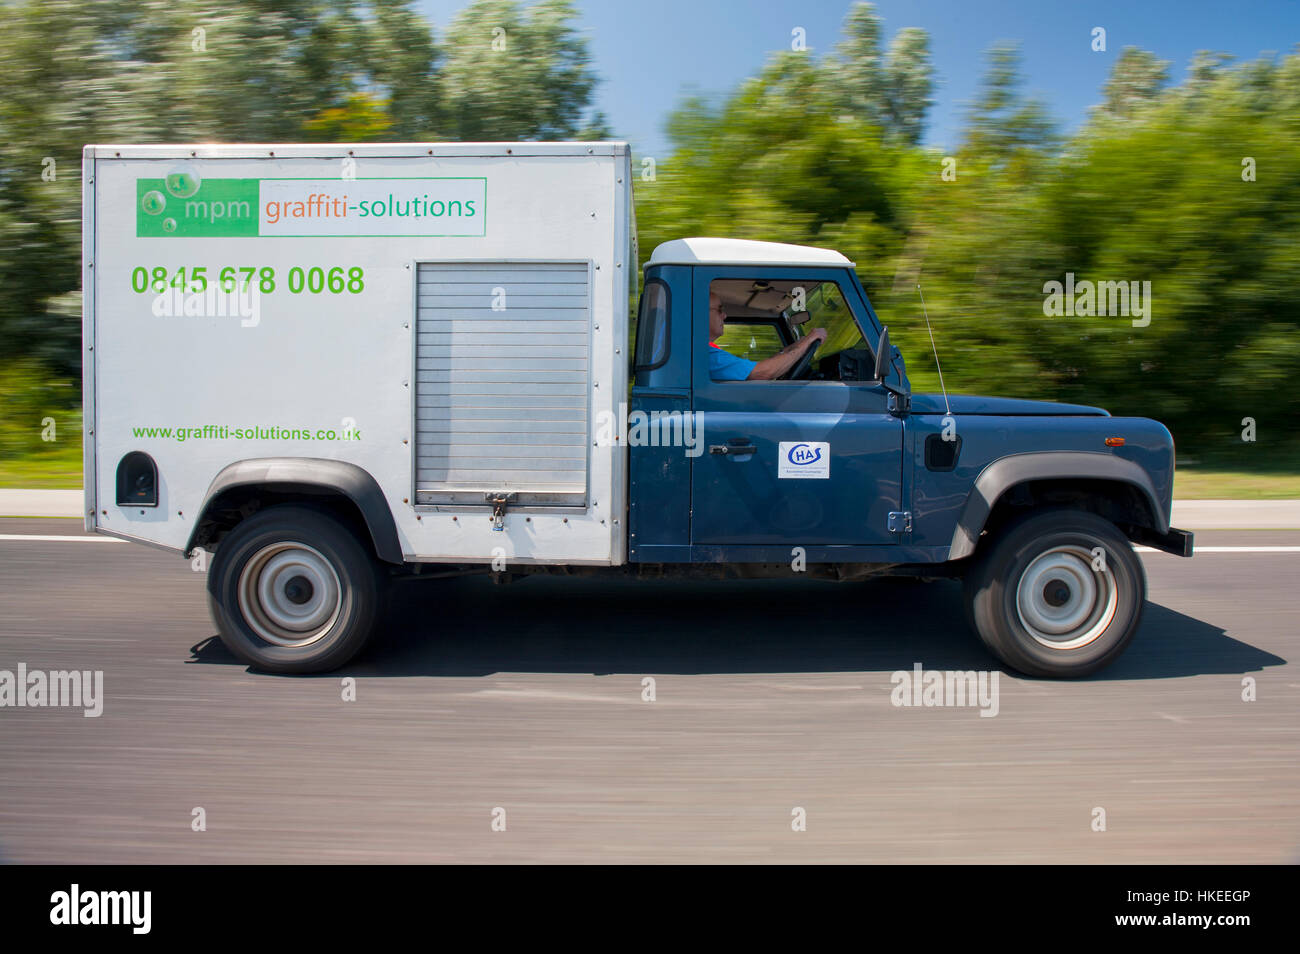 Working Land Rover Defender fitted with a high pressure pump in a box truck back Stock Photo